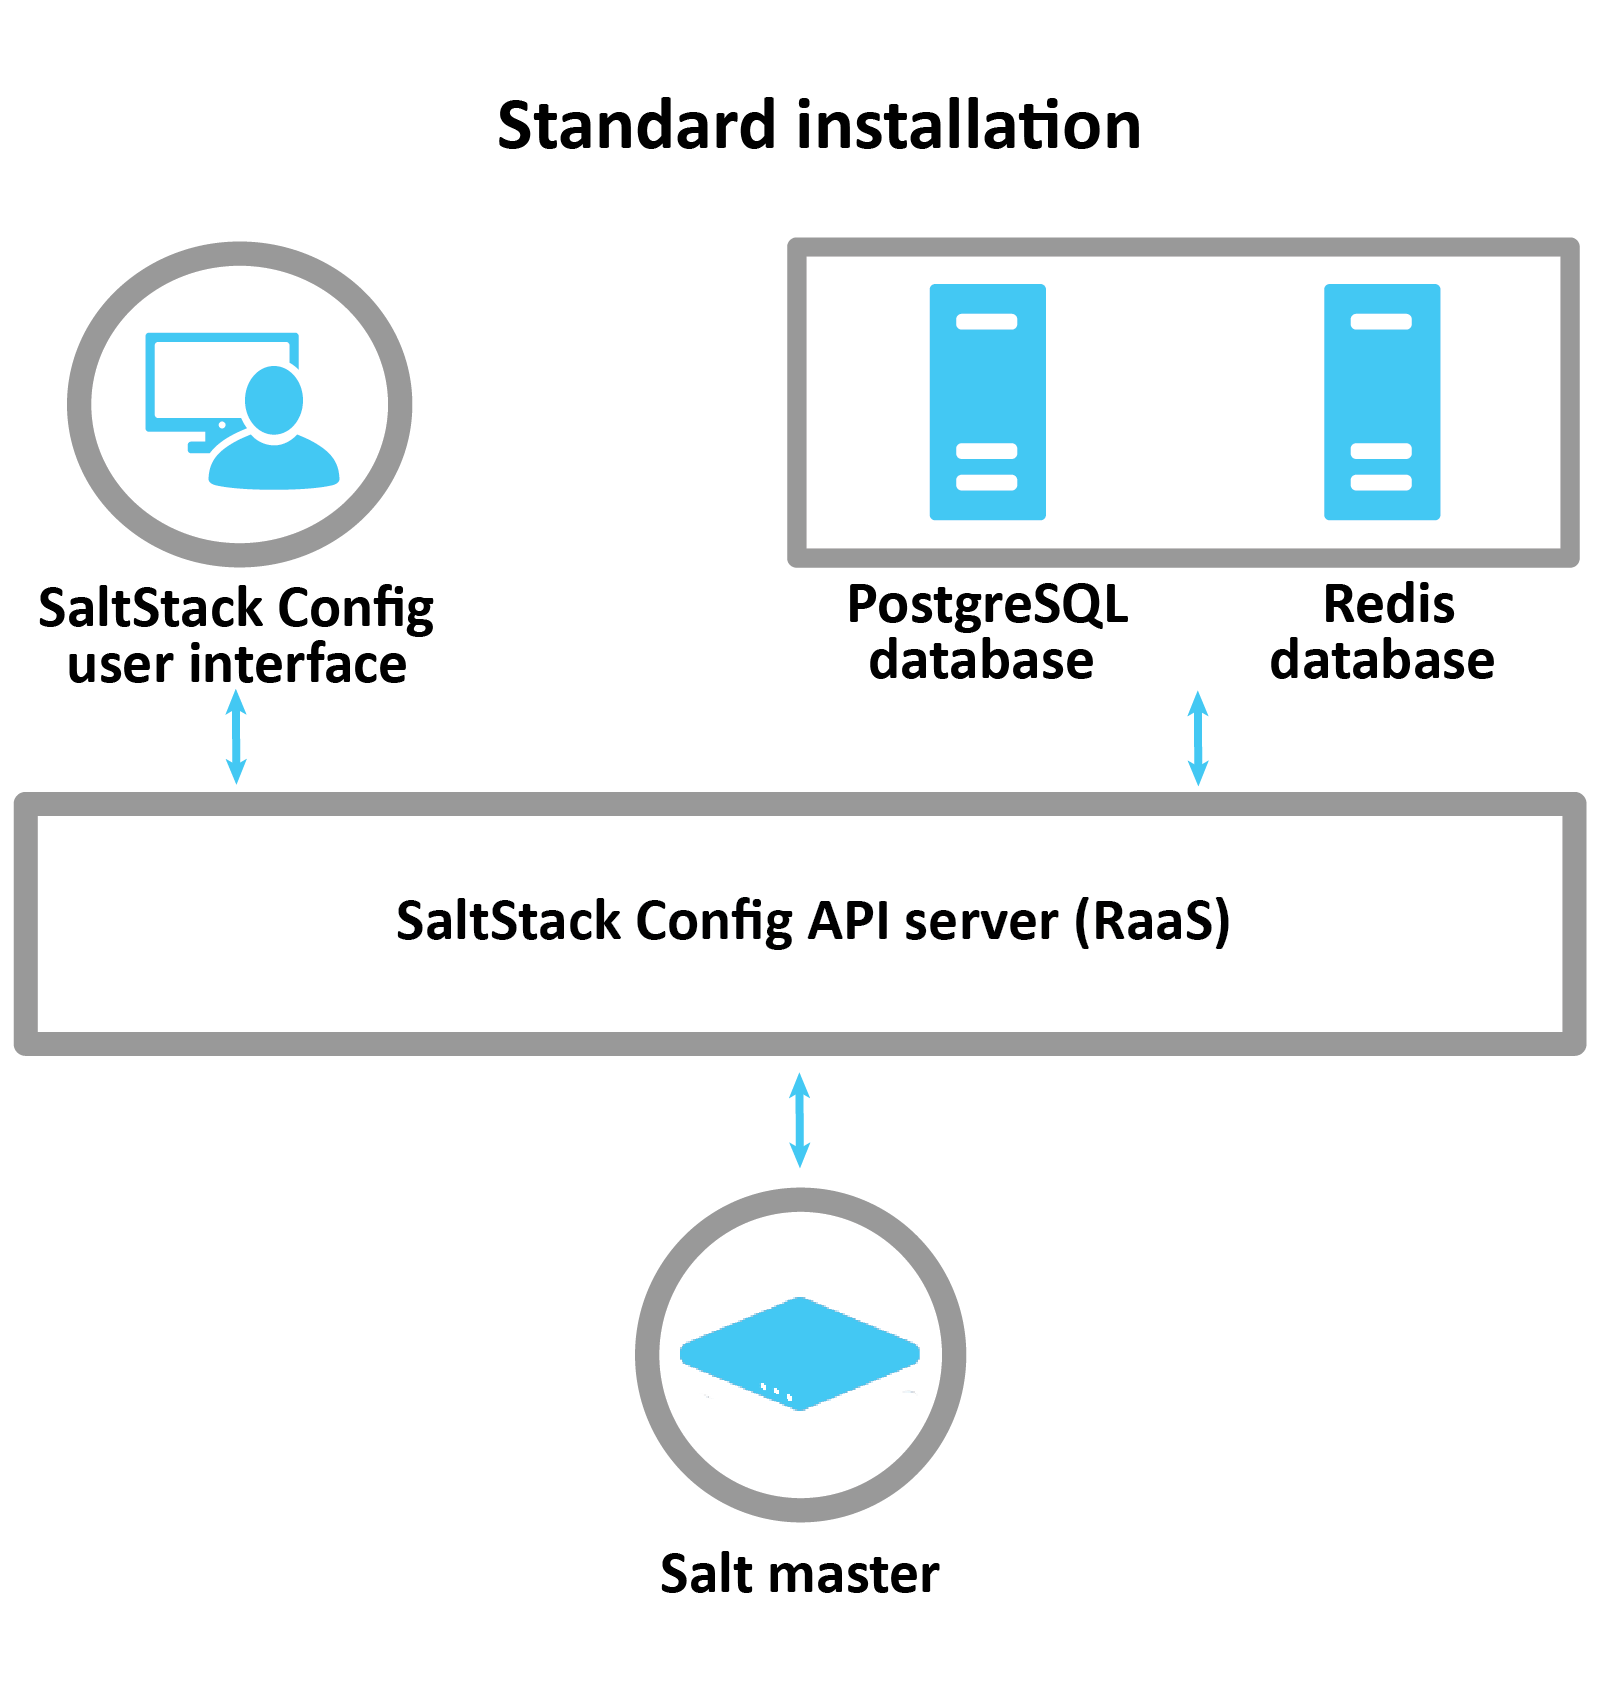 Diagram explaining a standard installation: The SaltStack Config UI, Postgres, and Redis database communicates with the RaaS Server which configures and controls the Salt Master.